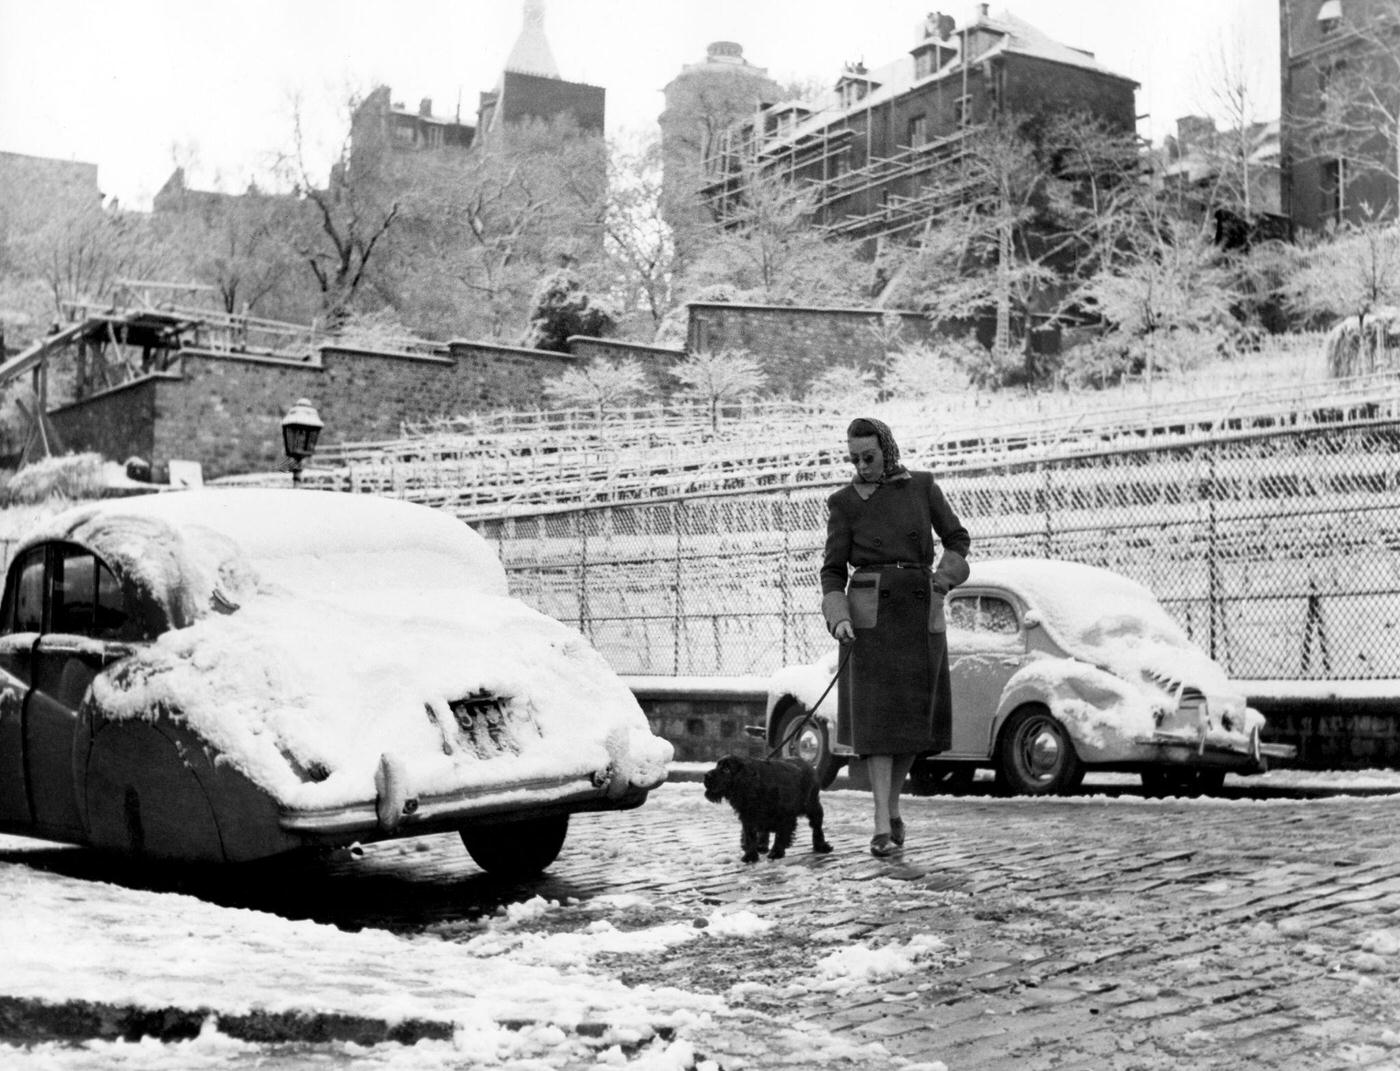 Woman Walking With Her Dog In Montmartre After Snowfalls, Paris, January 20, 1958.